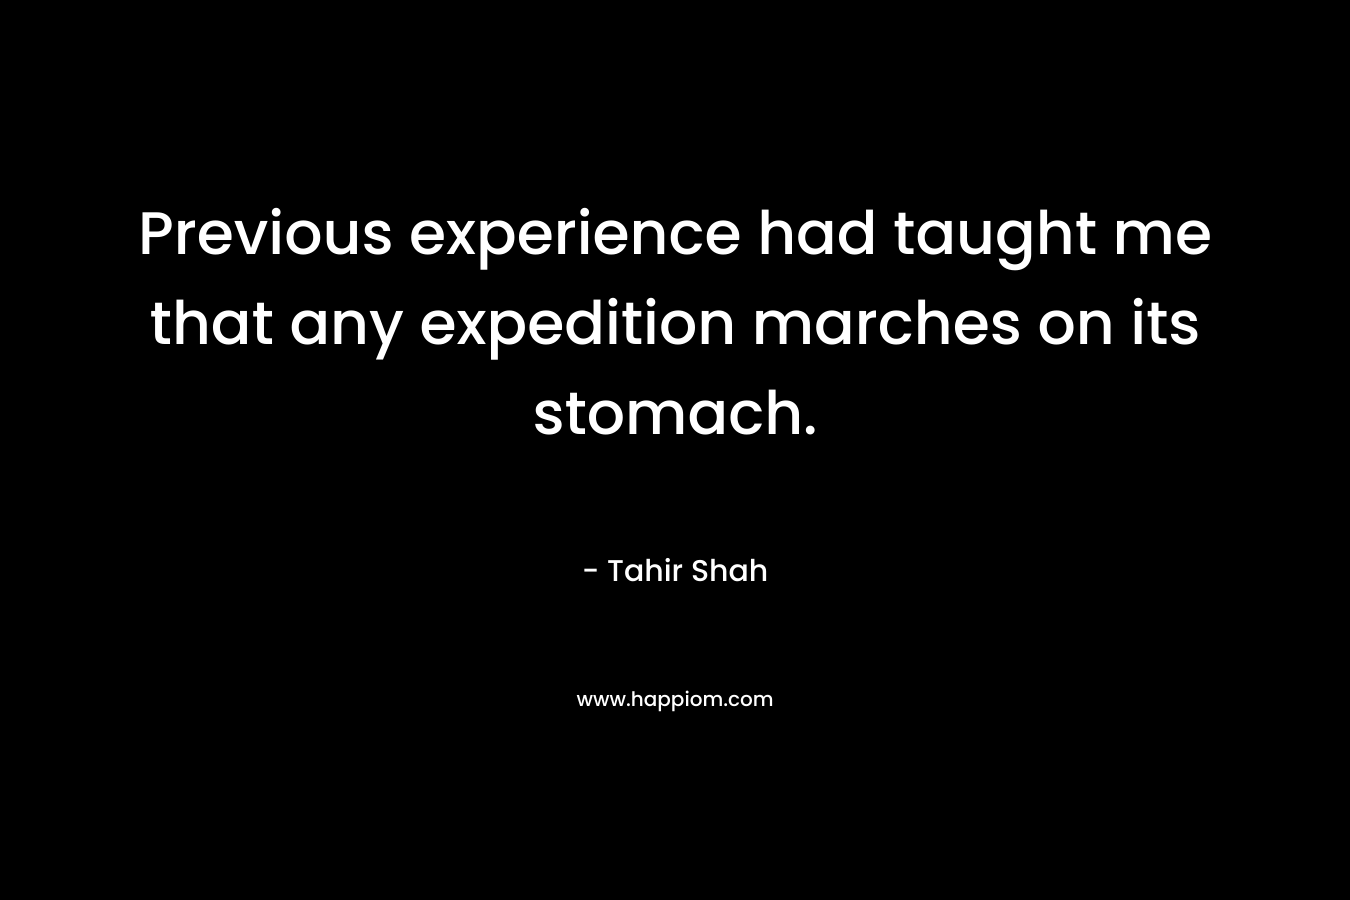 Previous experience had taught me that any expedition marches on its stomach. – Tahir Shah